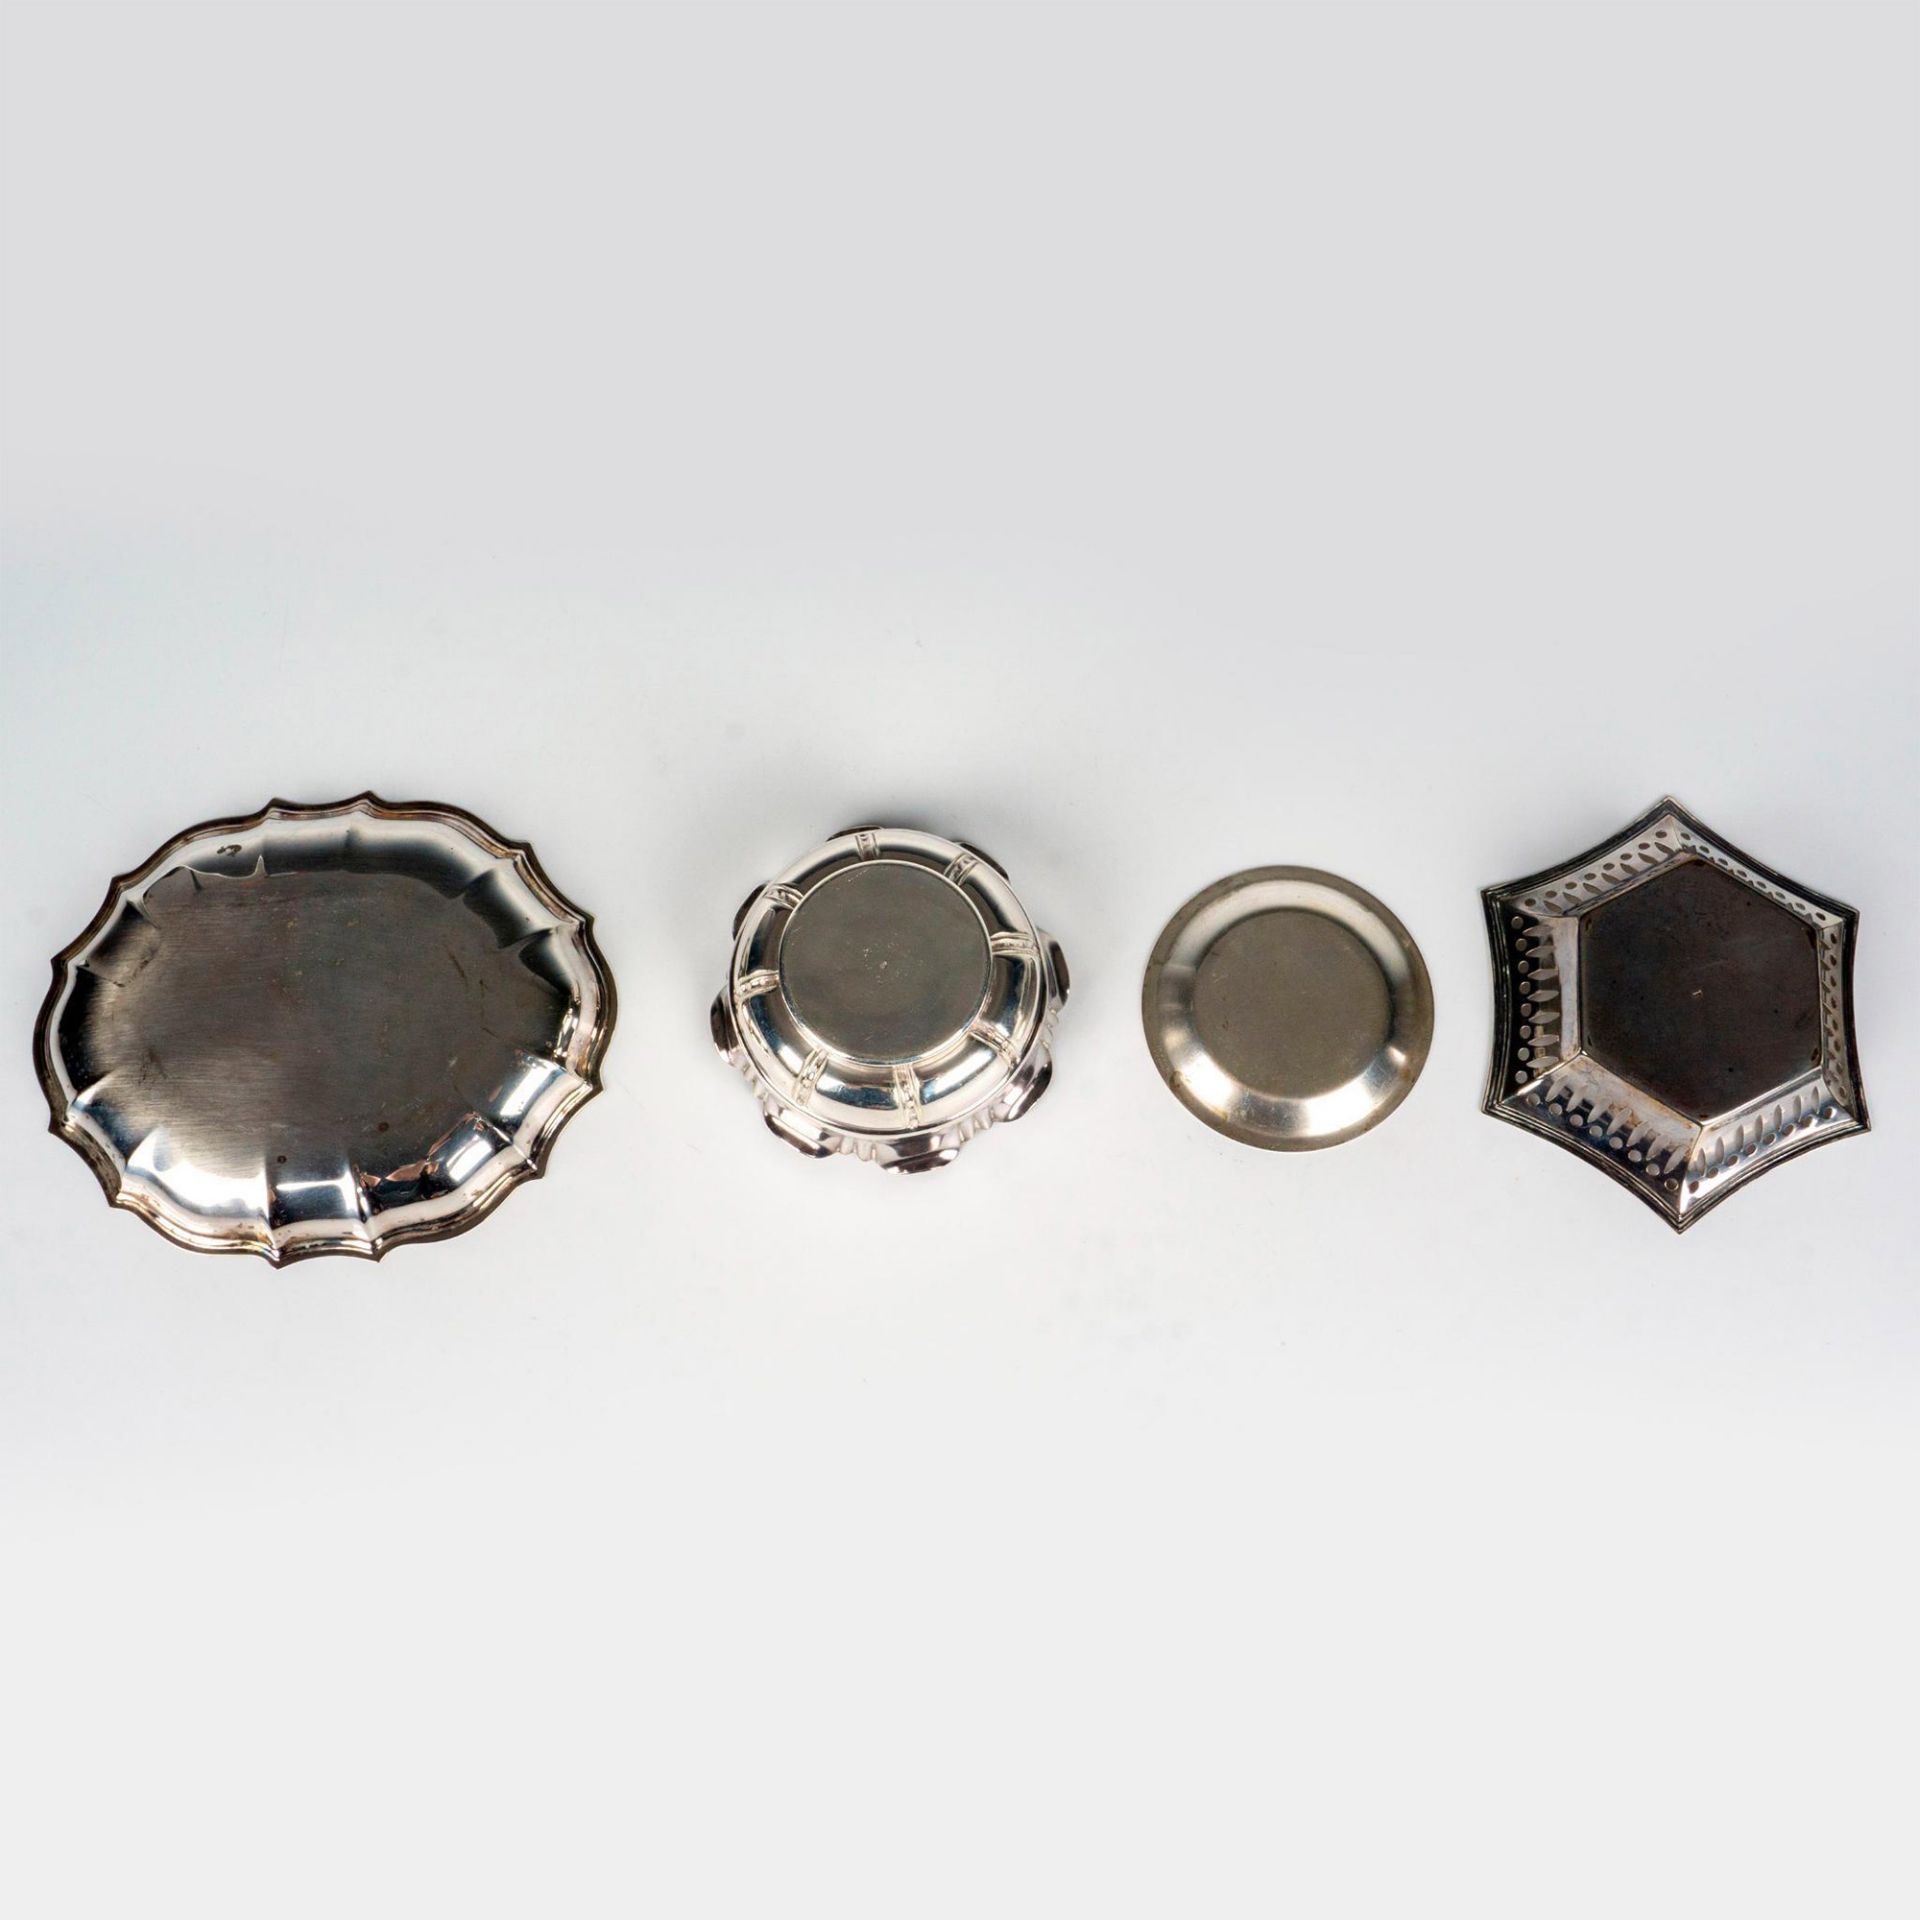 4pc Assorted Vintage Silver Plated Bowls and Trays - Image 2 of 2